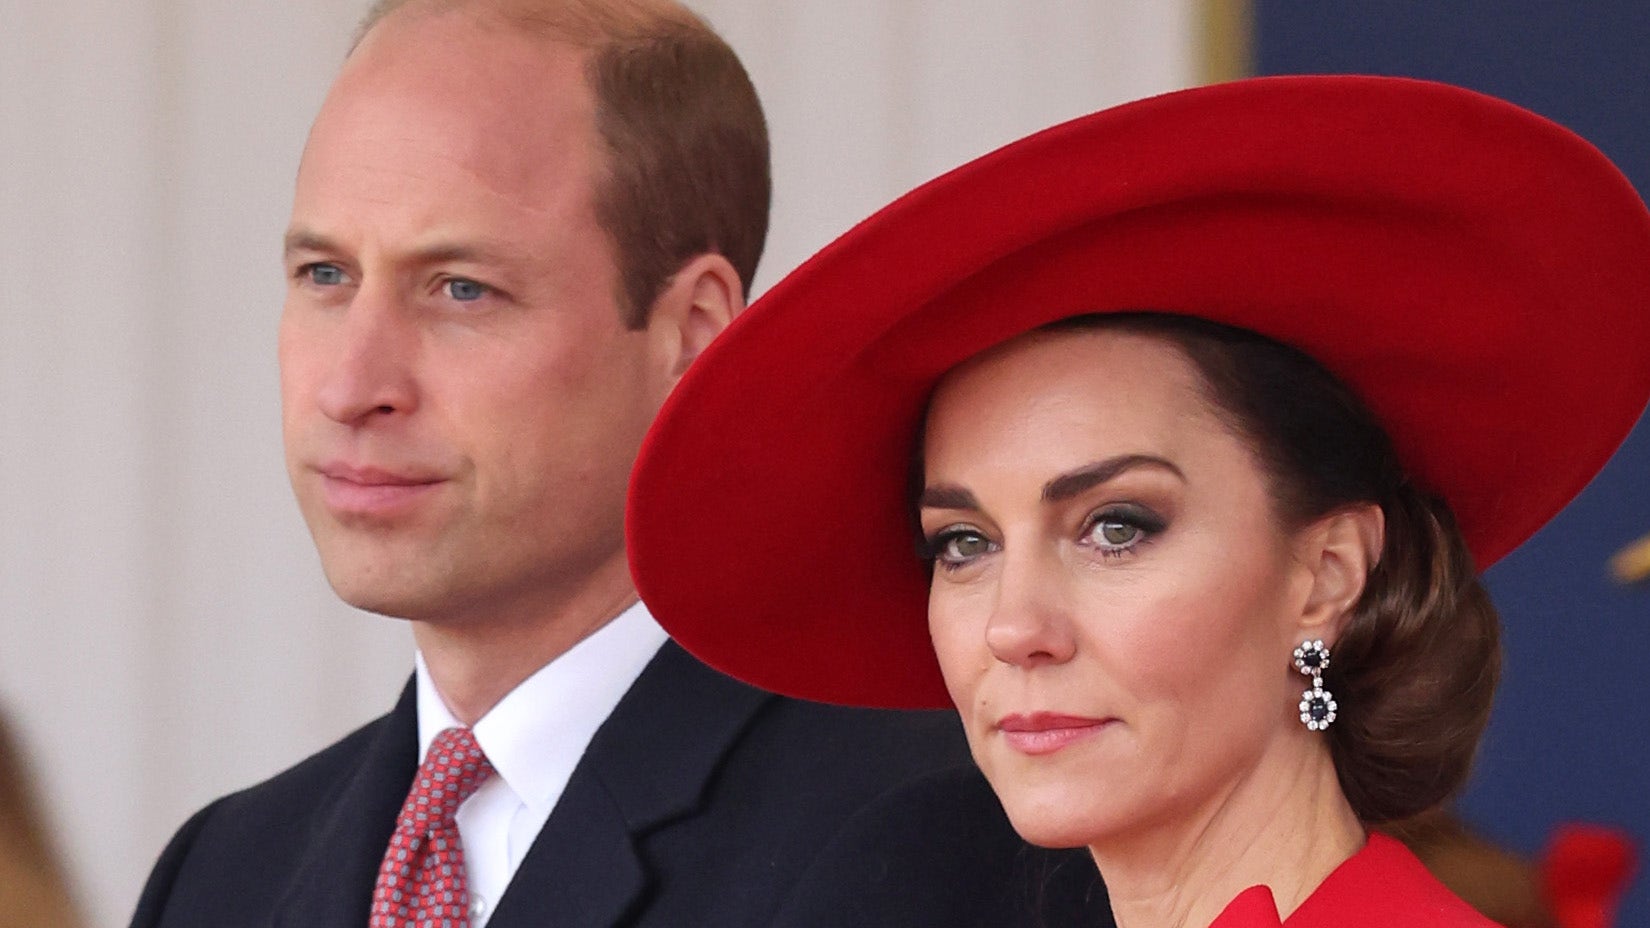 Kate Middleton and Prince William 'going through hell' amid Princess of ...